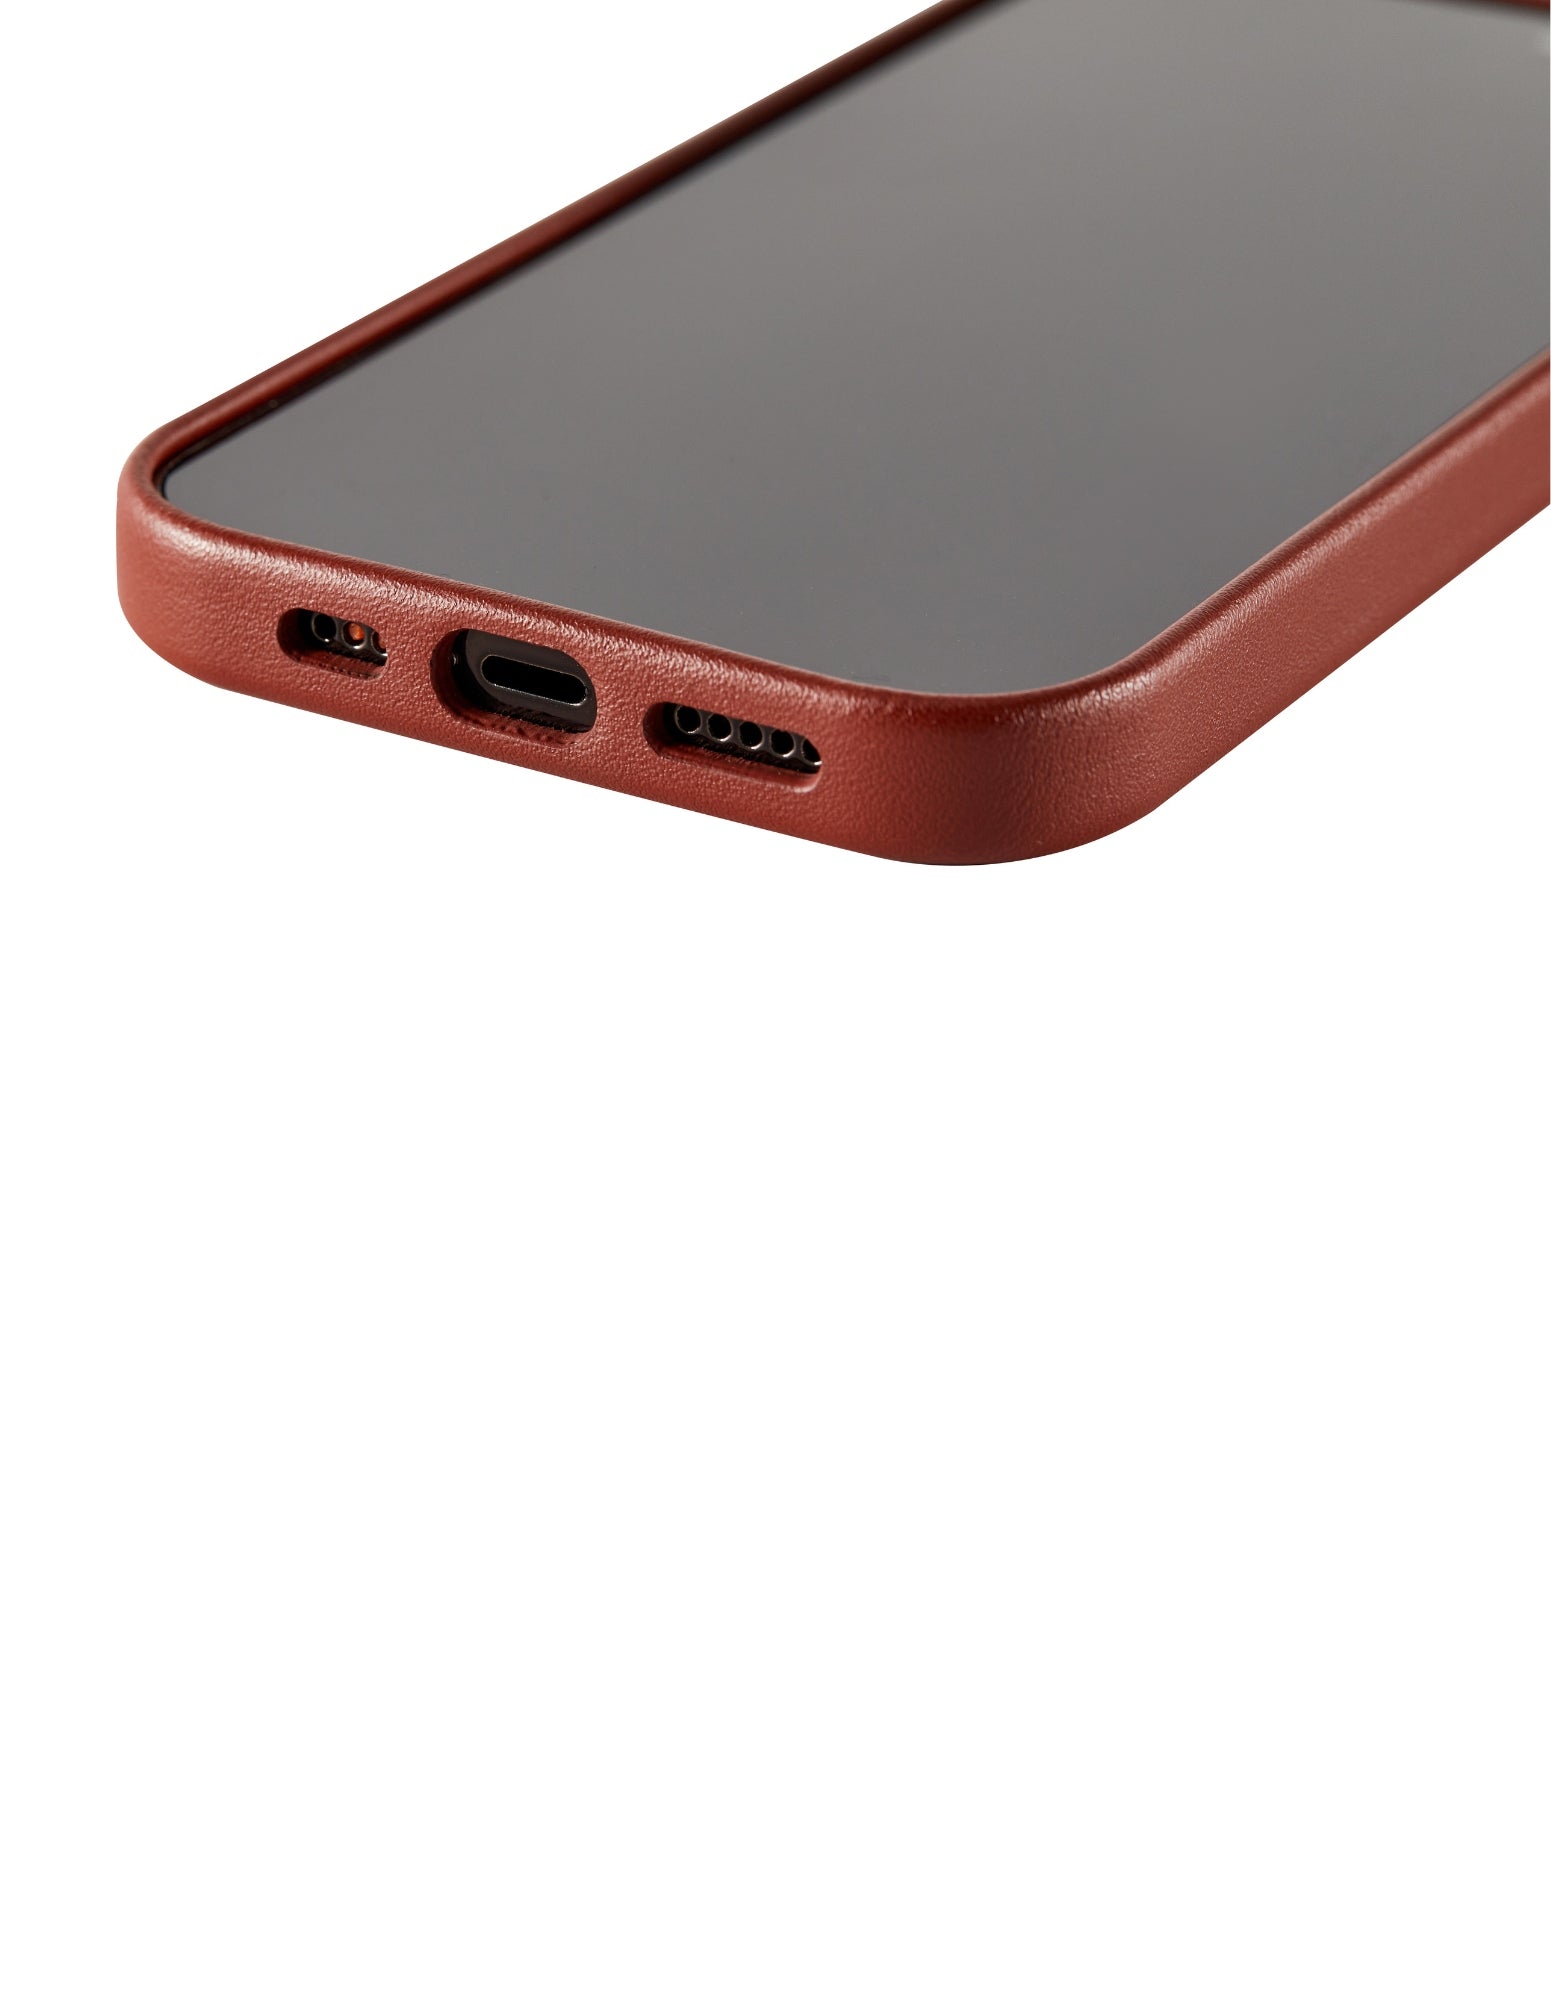 iPHONE 14 PRO VEGAN LEATHER CASE WITH MAGSAFE - BROWN-La Enviro-stride